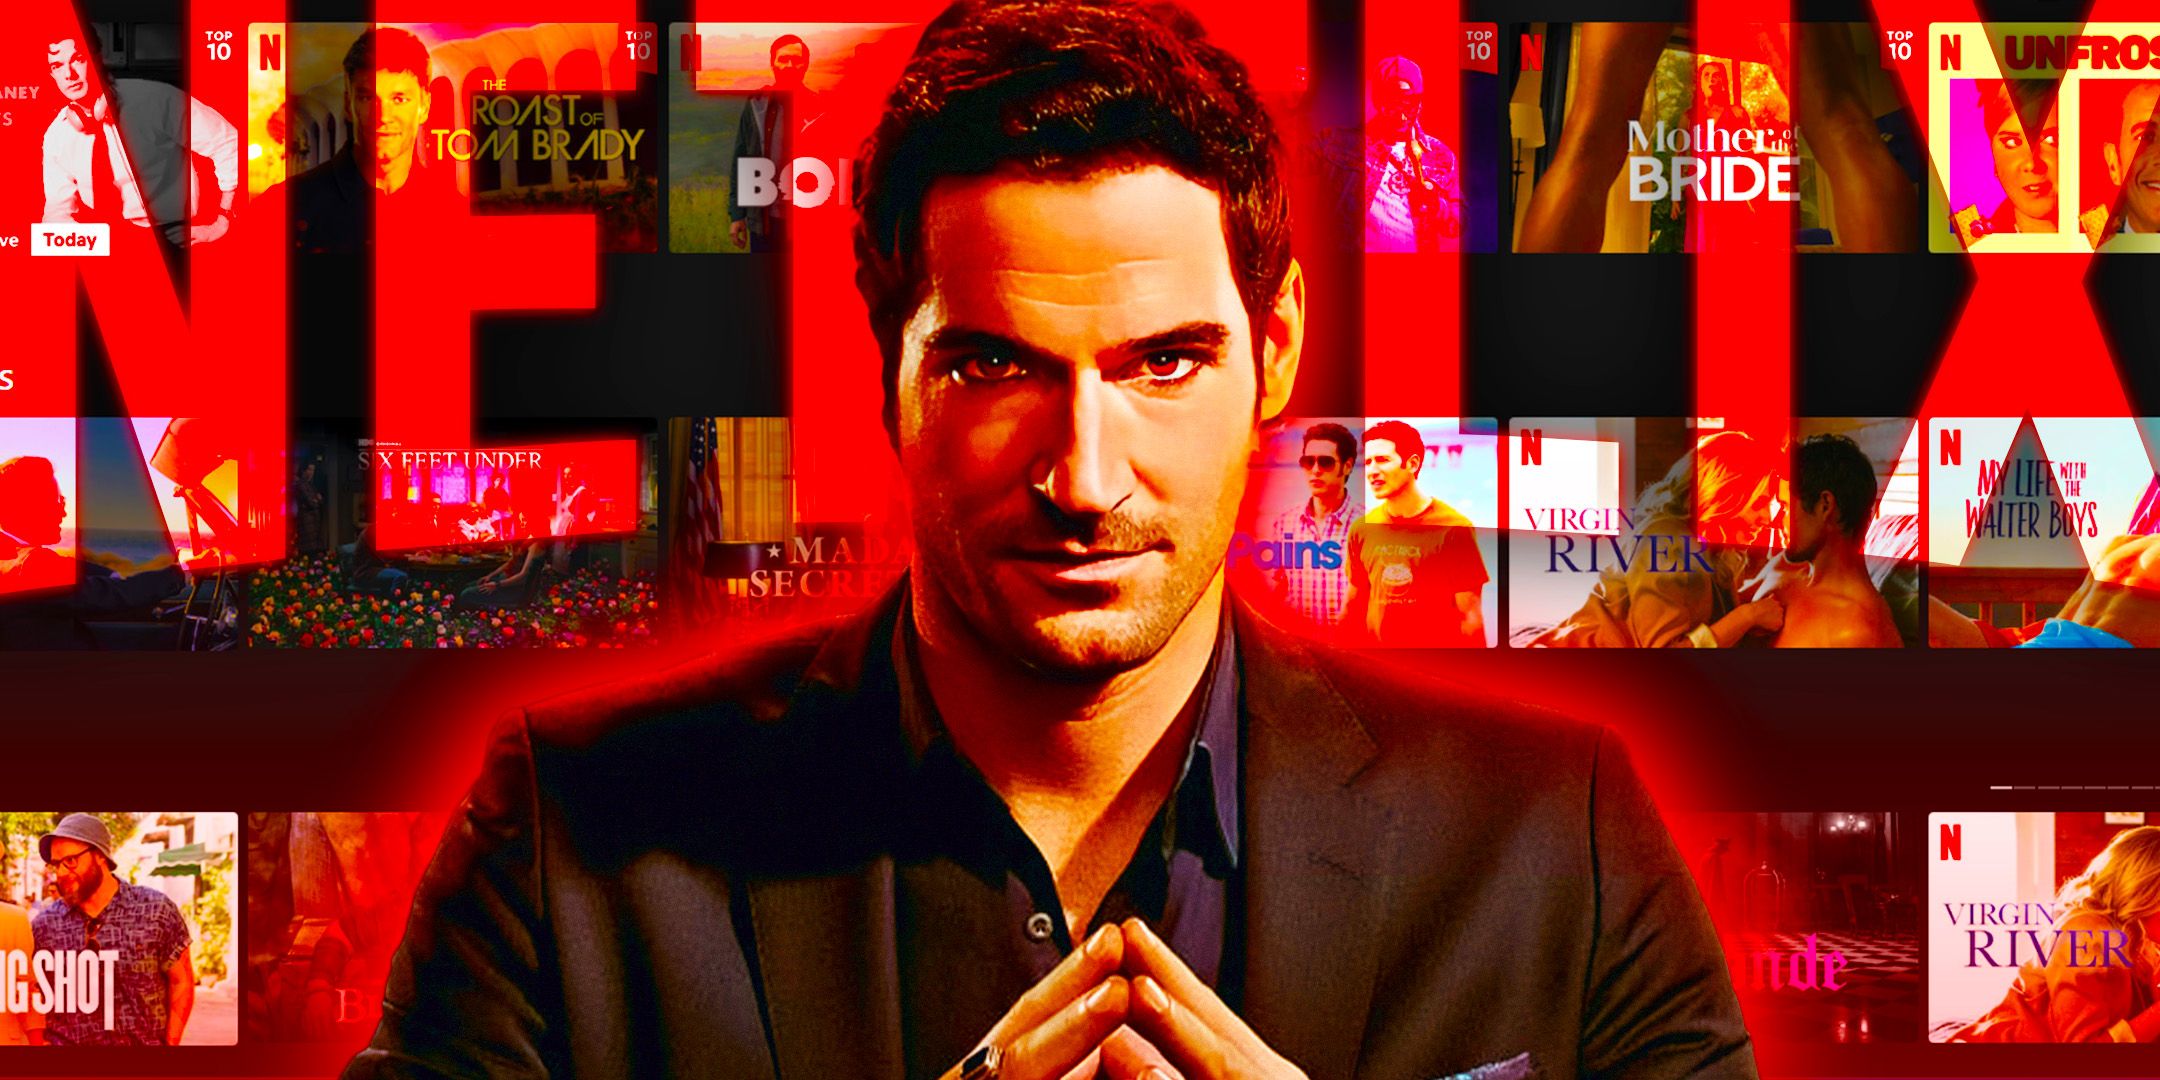 Tom Ellis as Lucifer in front of the Netflix screen and logo